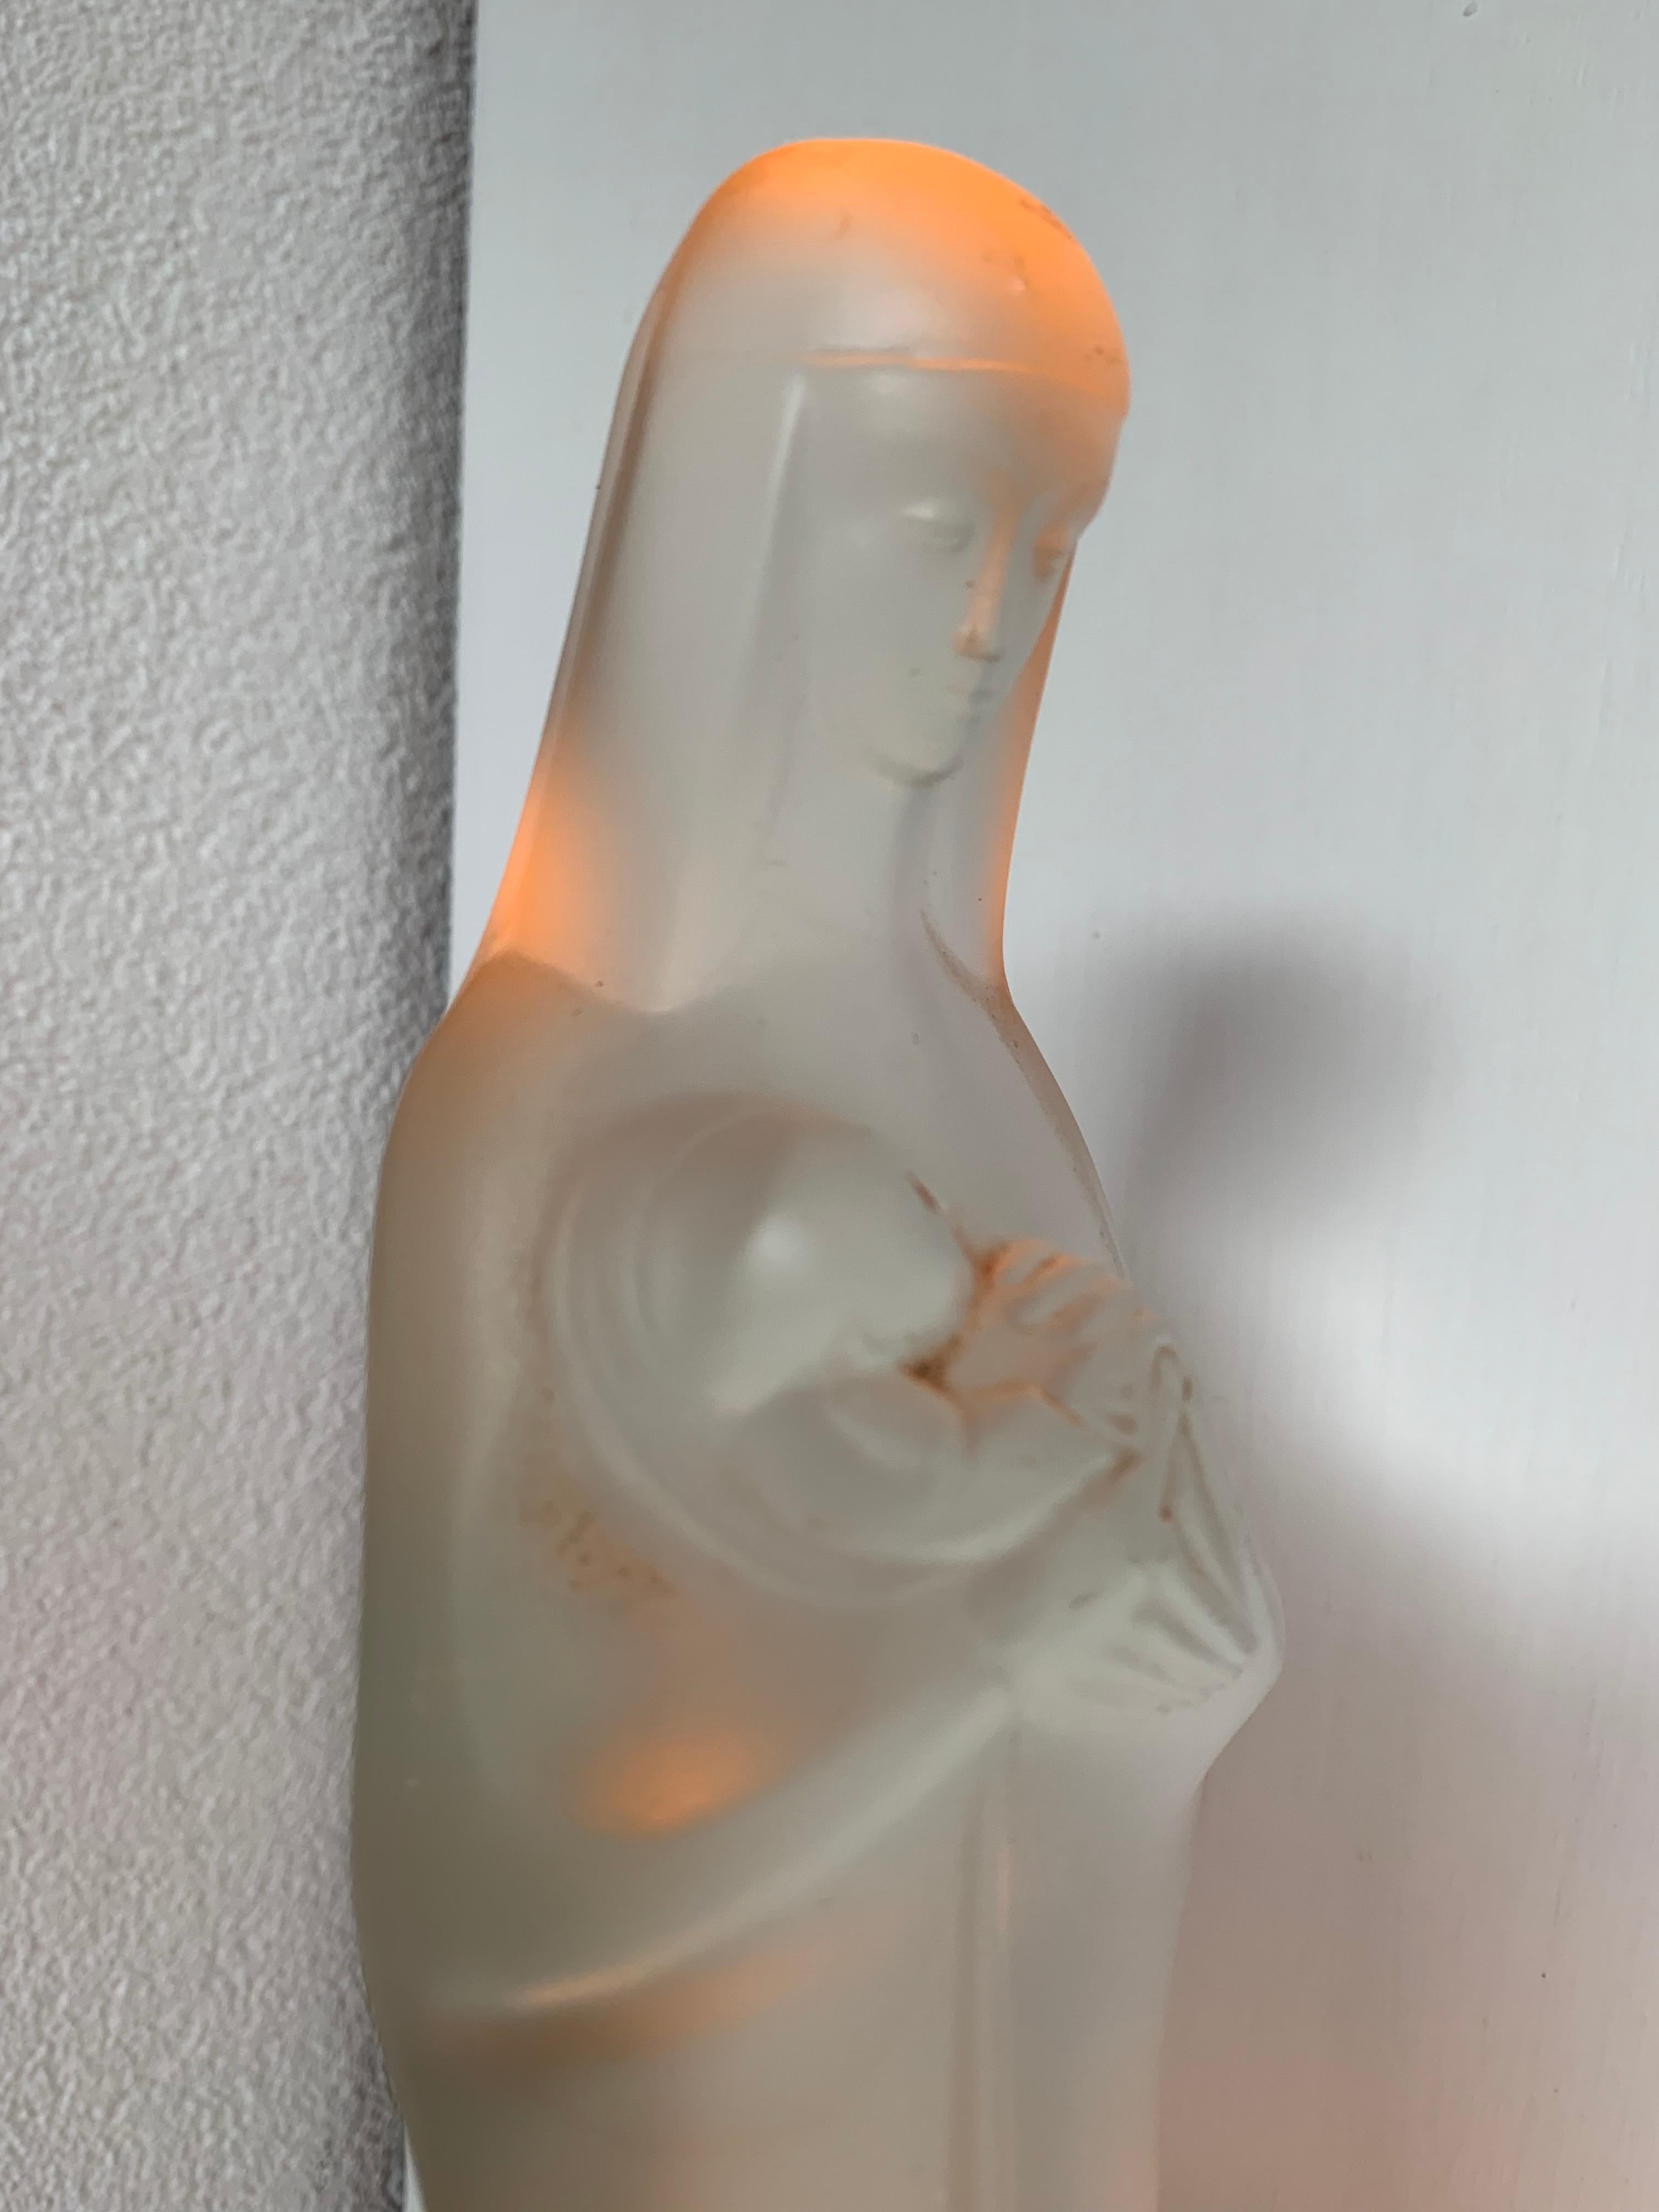 Beautiful and inspiring Mother Mary statuette by Steph Uiterwaal.

If you are a collector of stylish and meaningful religious art then this serene and divine sculpture of Mary holding her new-born child Jesus could be the perfect addition to your